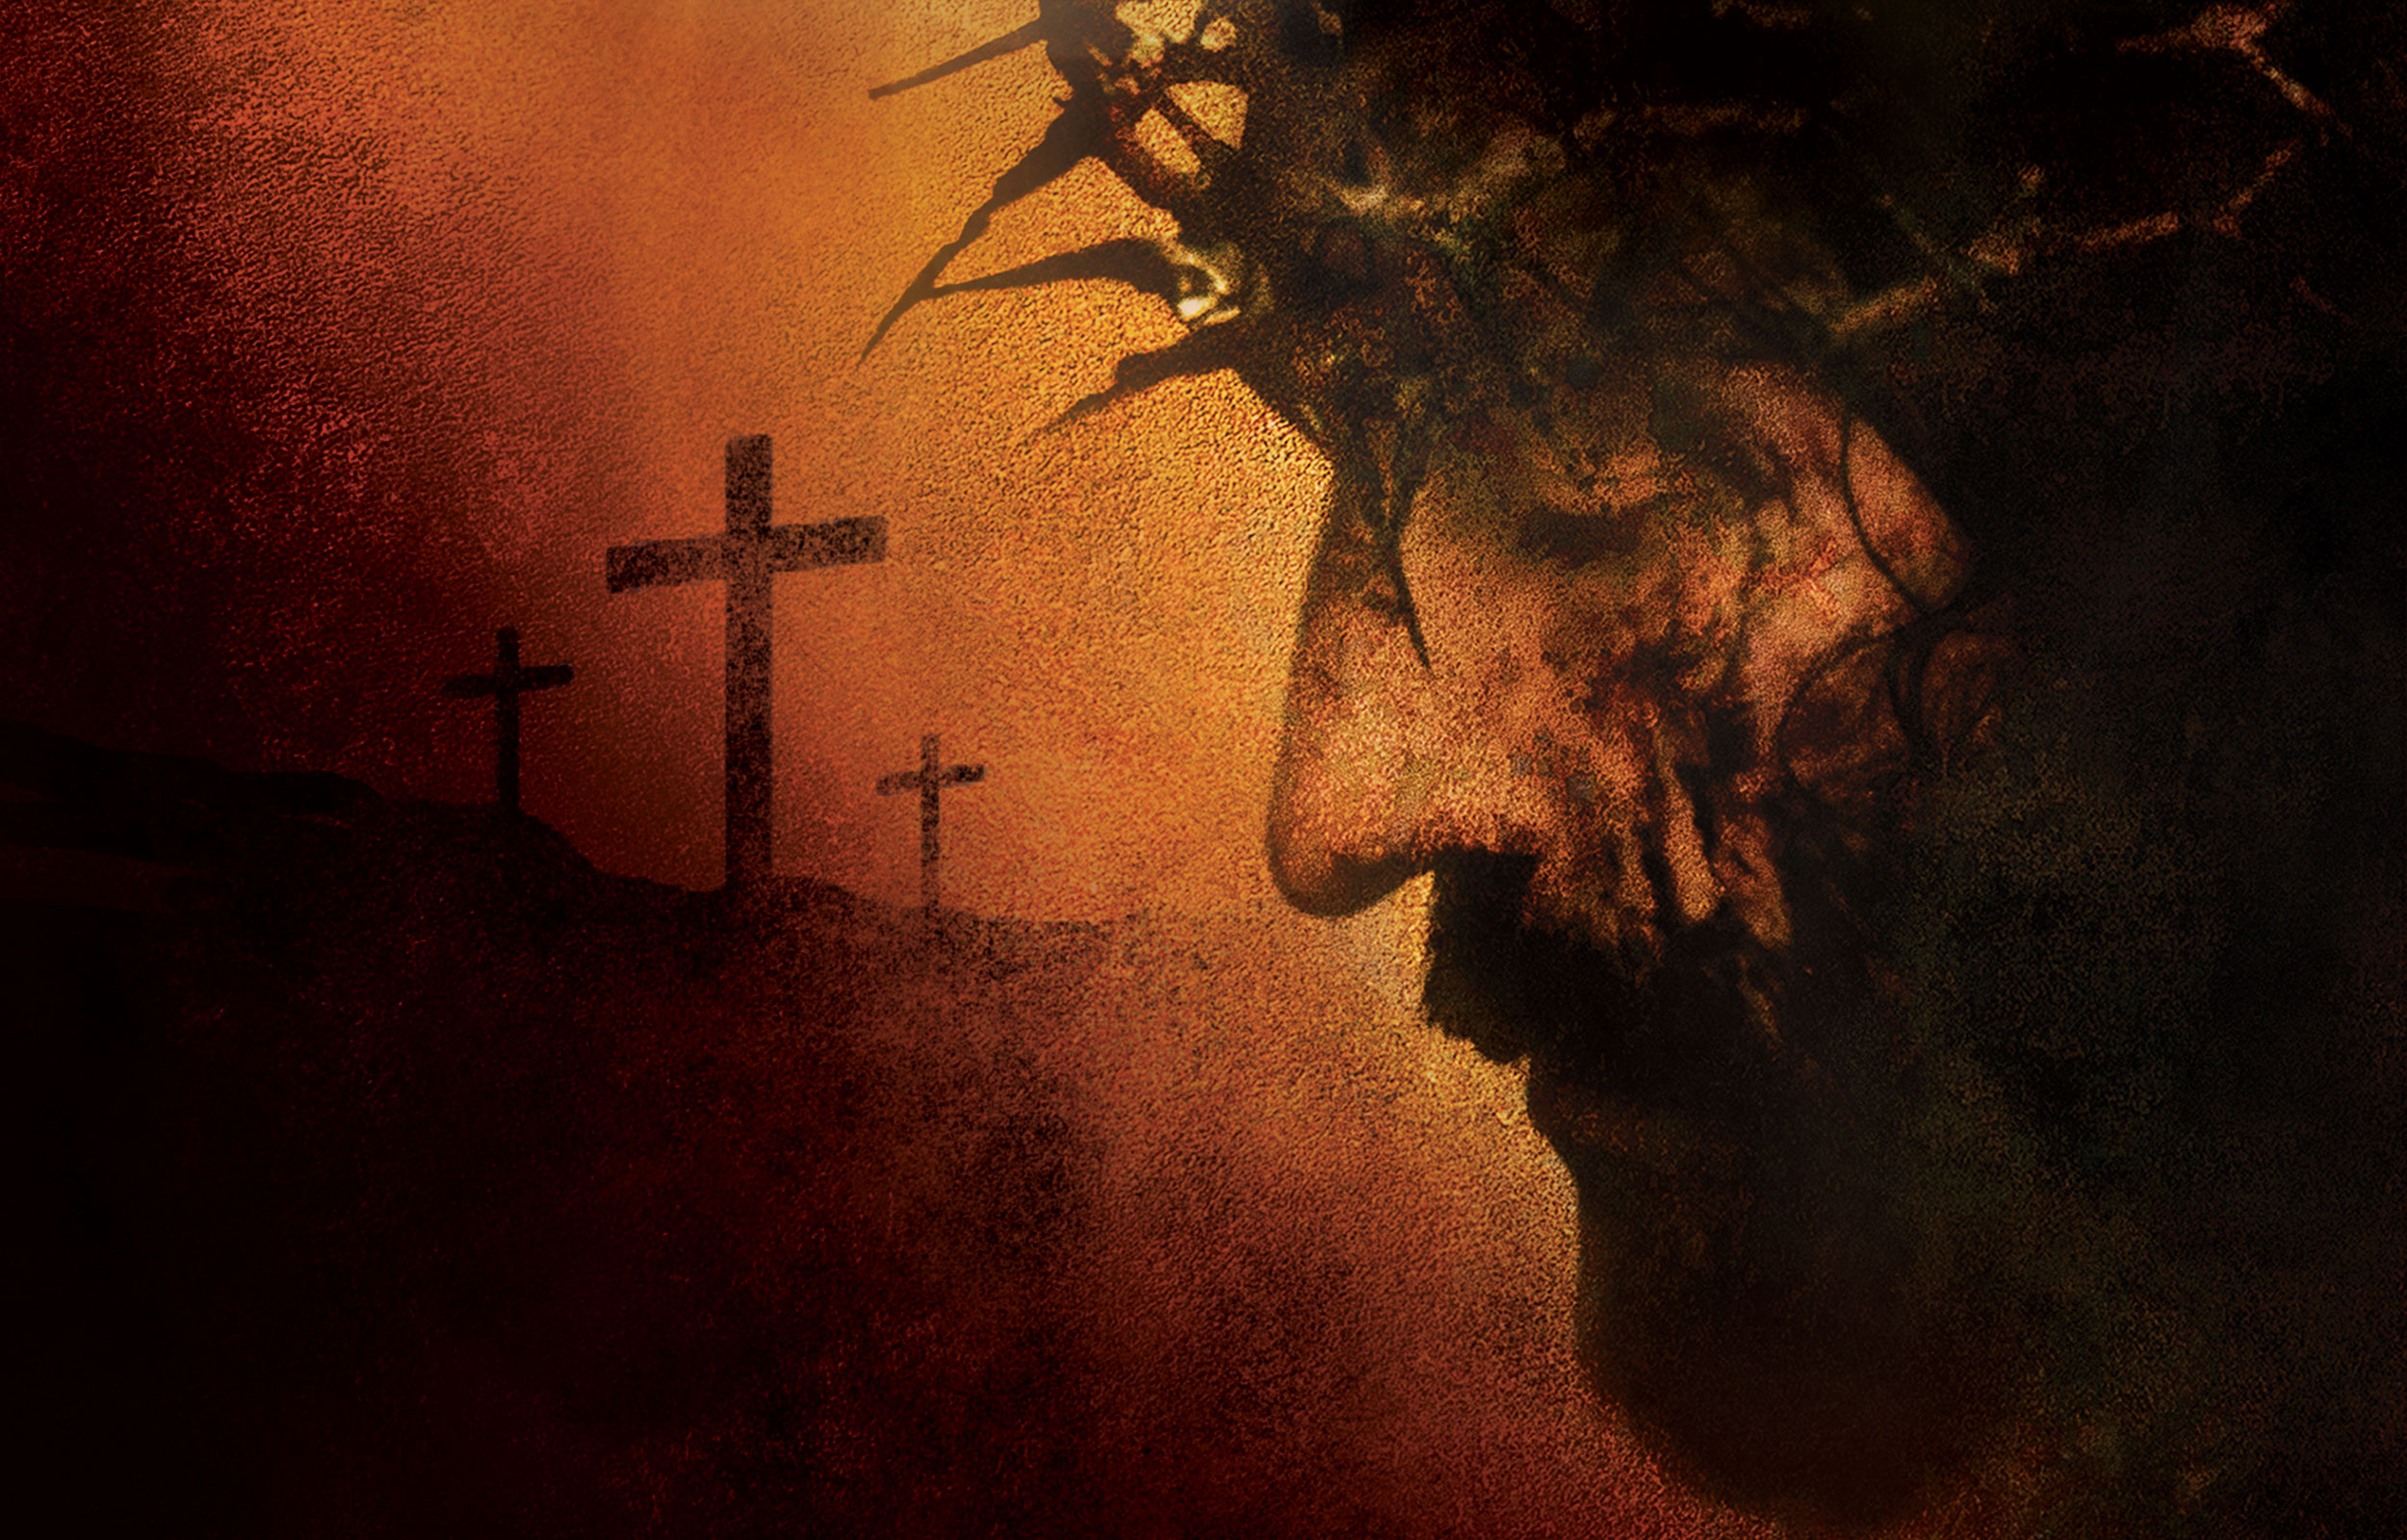 passion of the christ wallpaper,religious item,cross,darkness,sky,symbol